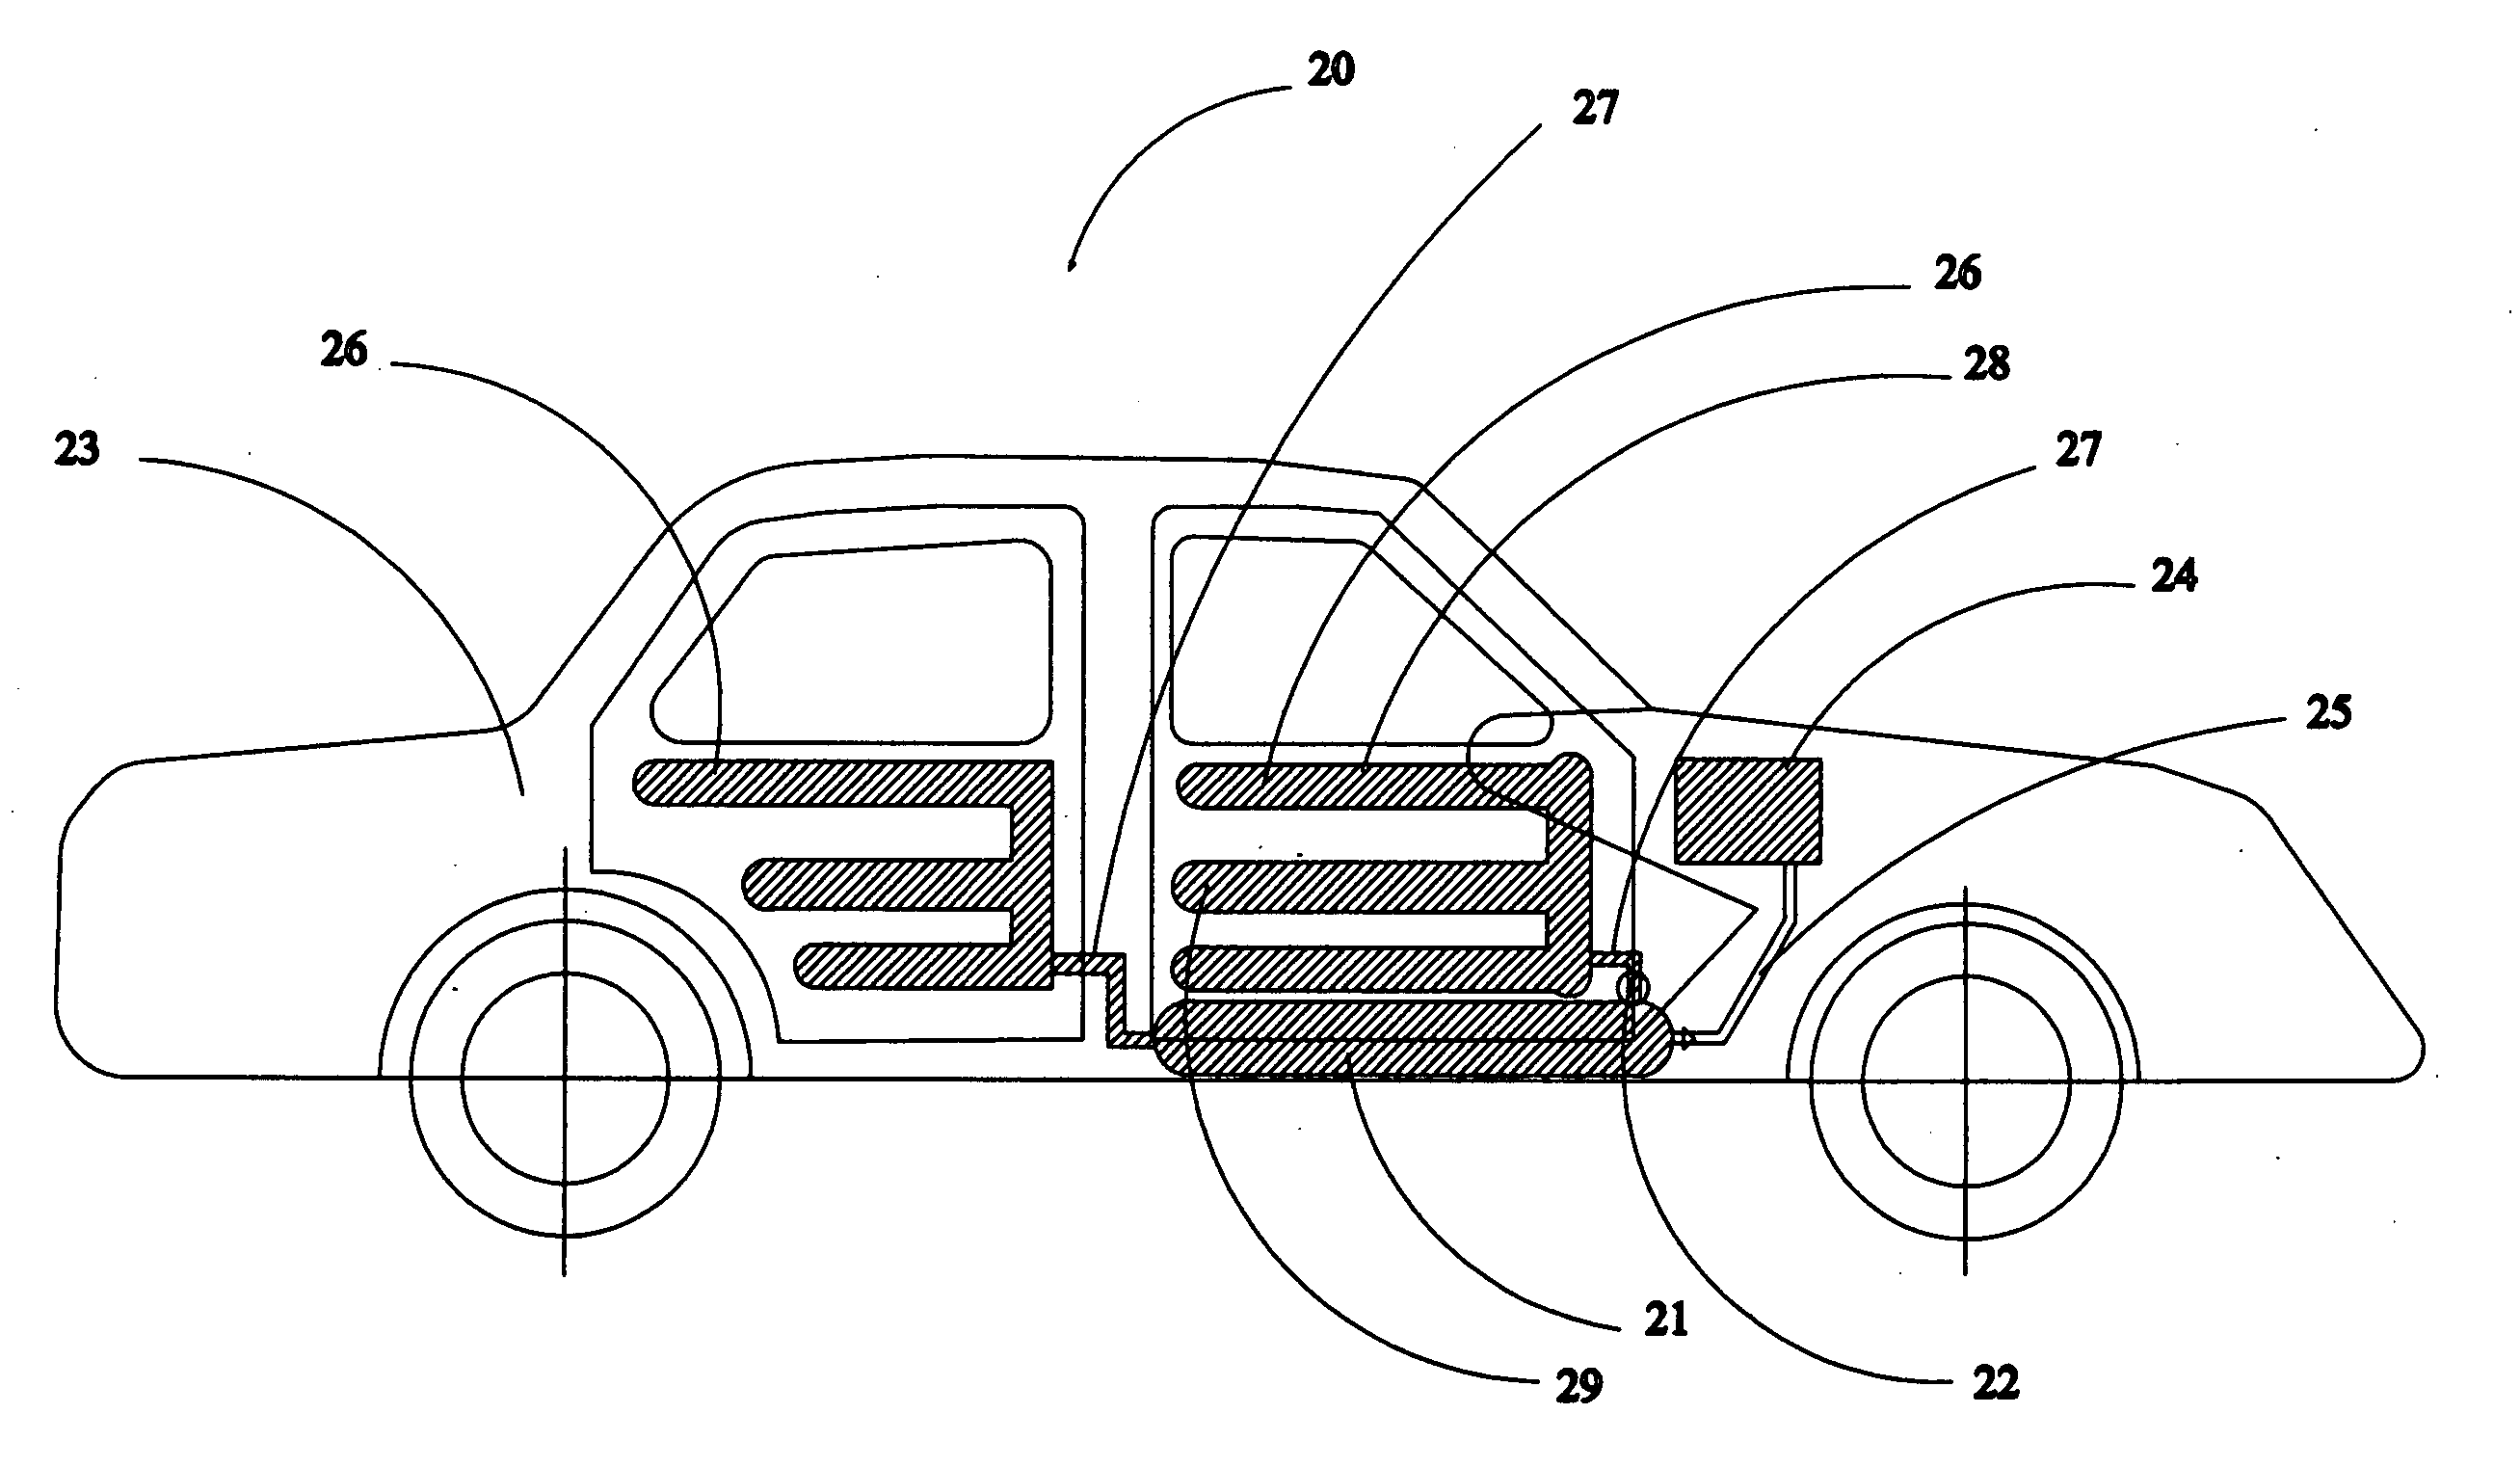 Restorable vehicle occupant safety system